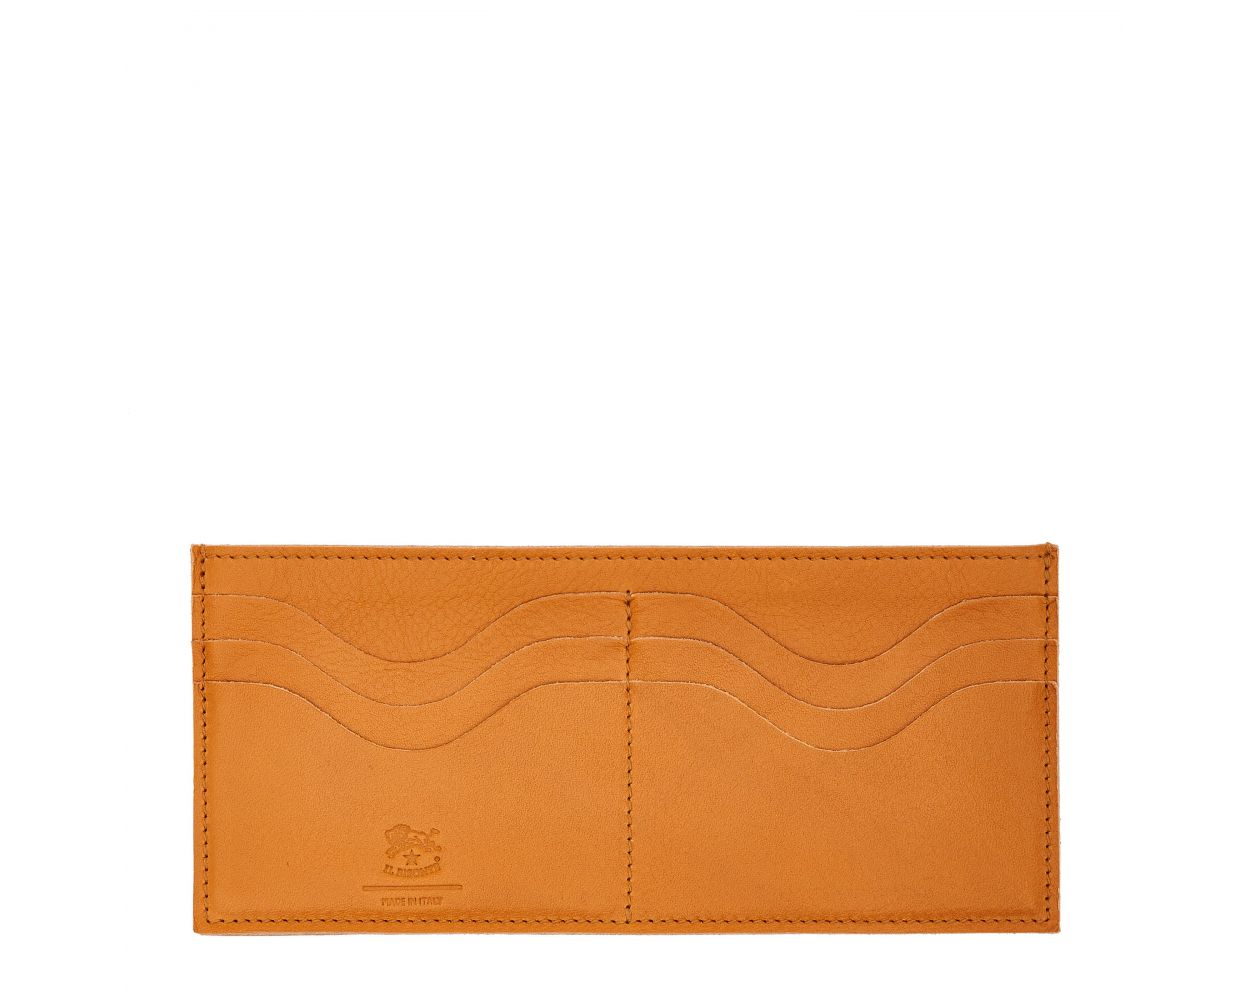 Women's Zip Around Wallet in Soft Vegetable-Tanned Cowhide Leather color - Salina line SZW045 - Honey